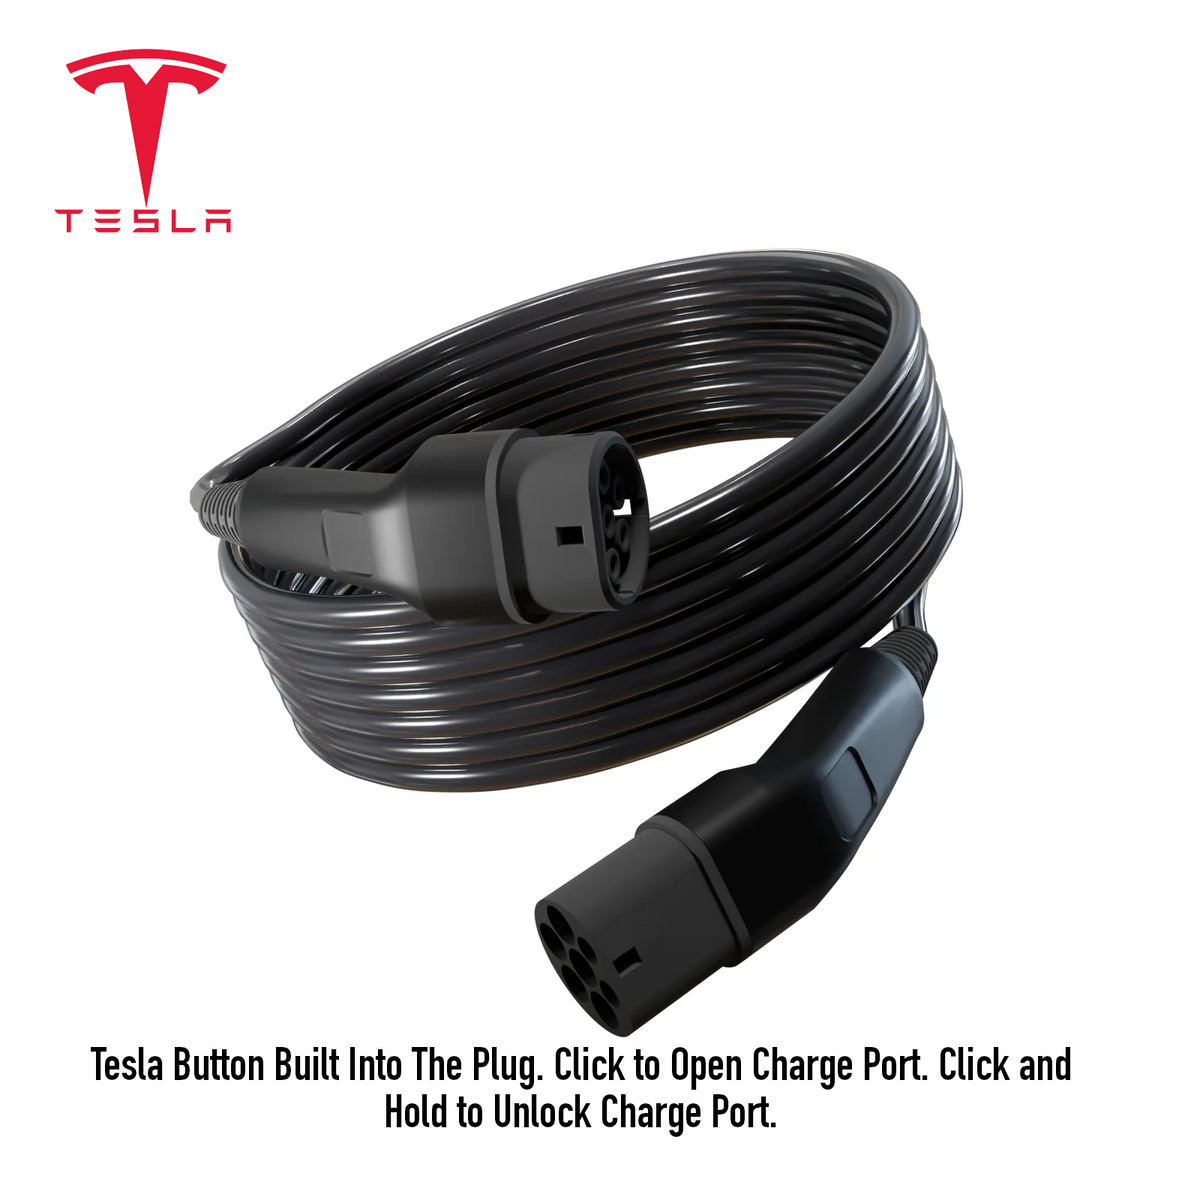 Tesla Charging Cables